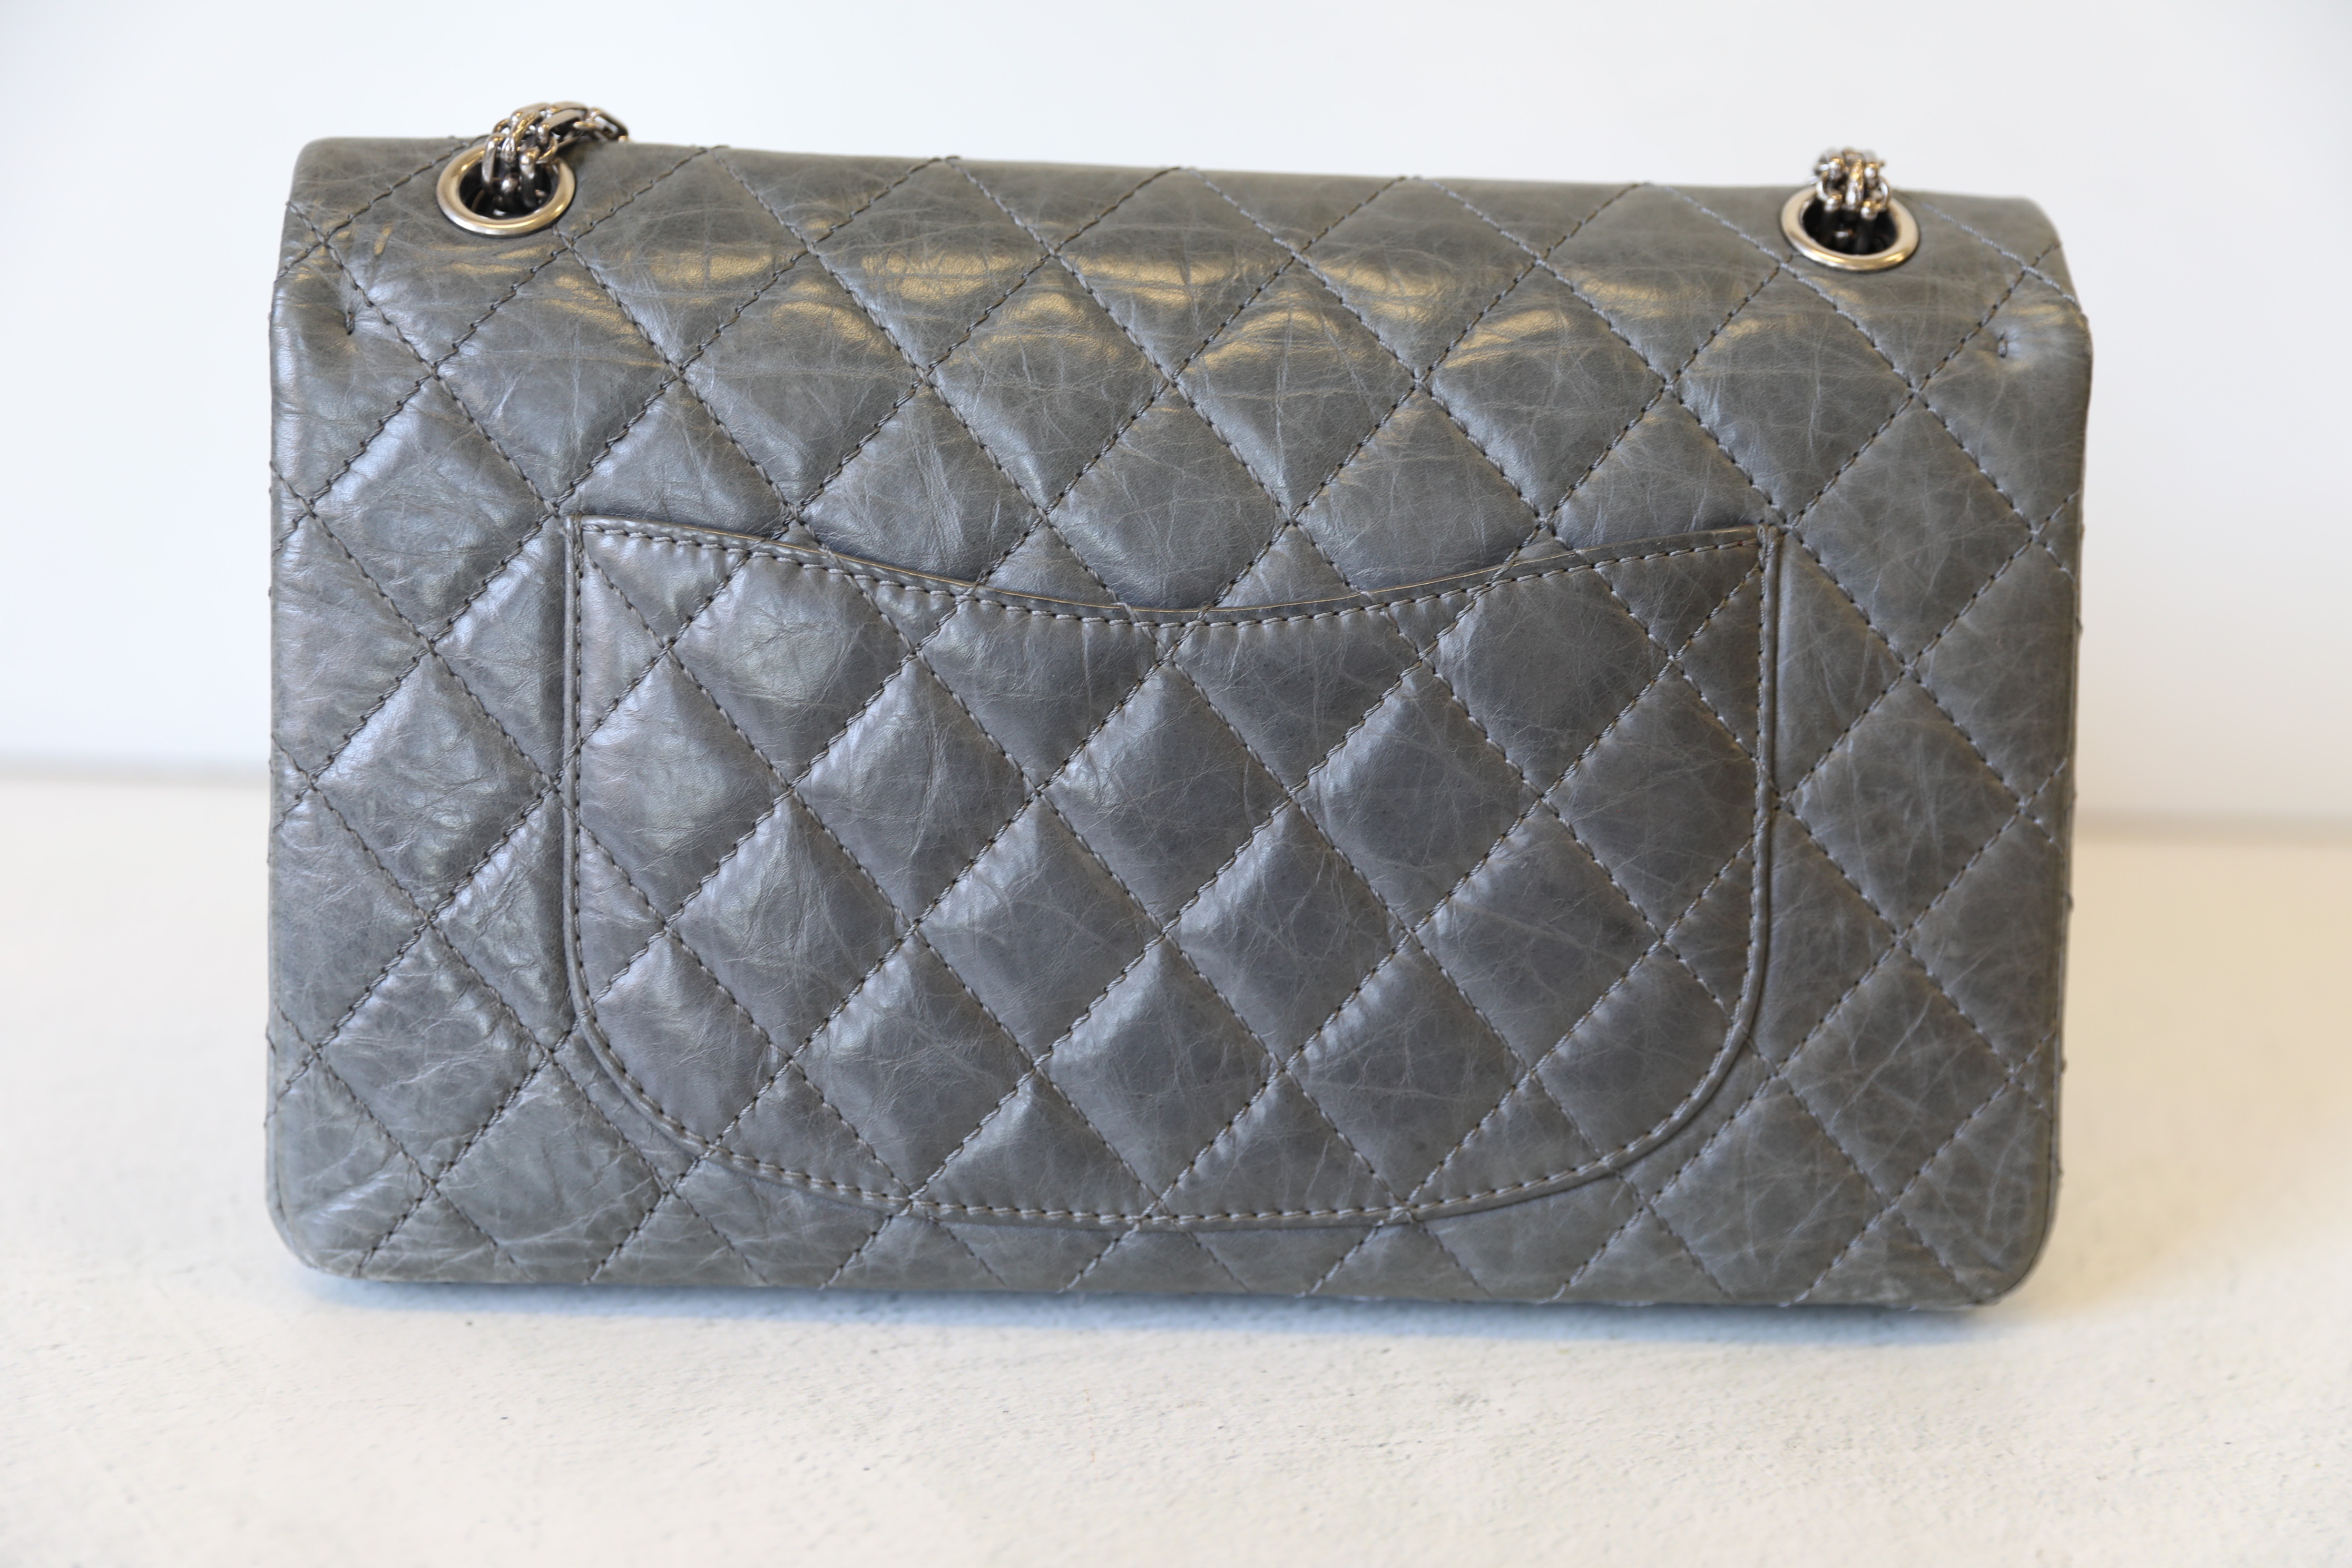 Chanel Reissue 2.55 226 Flap Bag, Grey Calfskin with Ruthenium Hardware,  Preowned in Box WA001